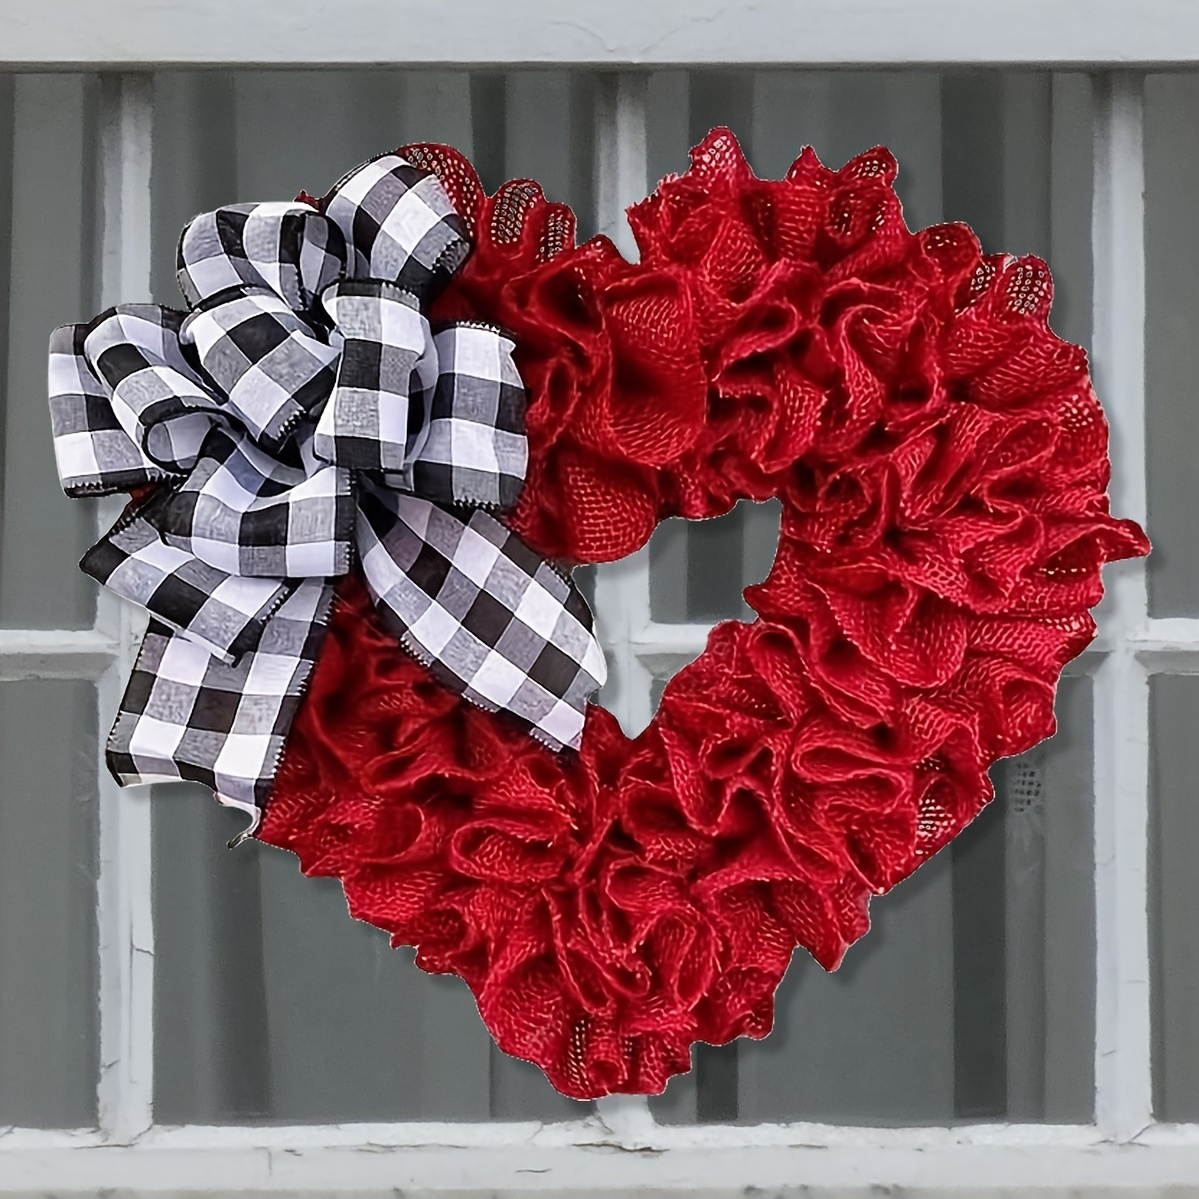 Valentines Day Wreath, 18 Inch Burlap Heart Shaped Door Wreath with Buffalo  Plaid Bows, Valentines Wreaths for Front Door Farmhouse Valentine's Day